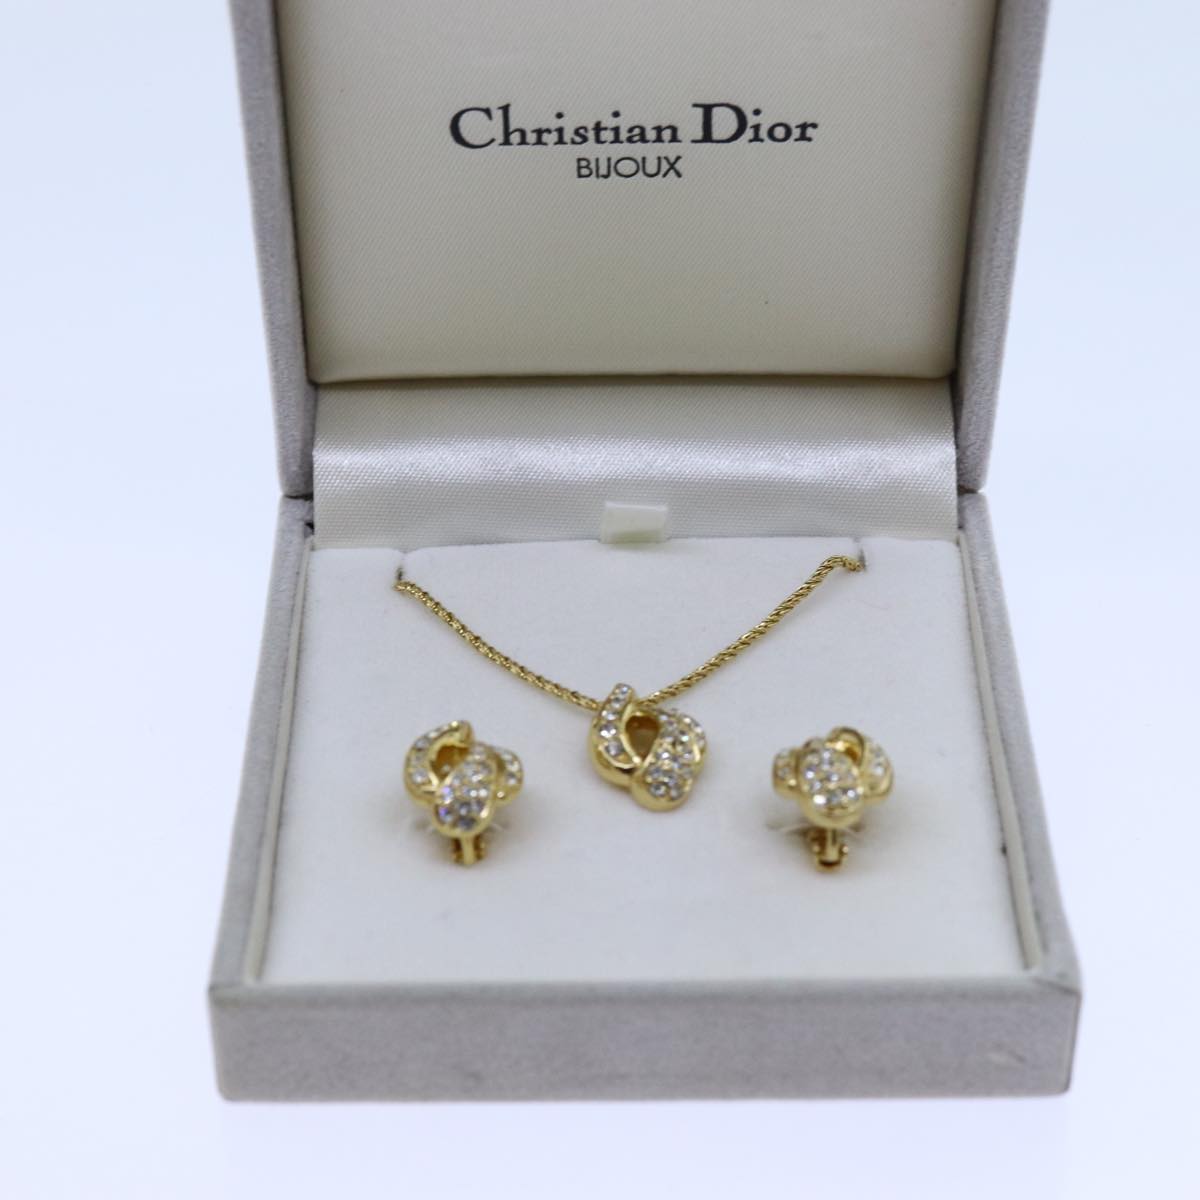 Christian Dior Earring Necklace Set Gold Auth am6081